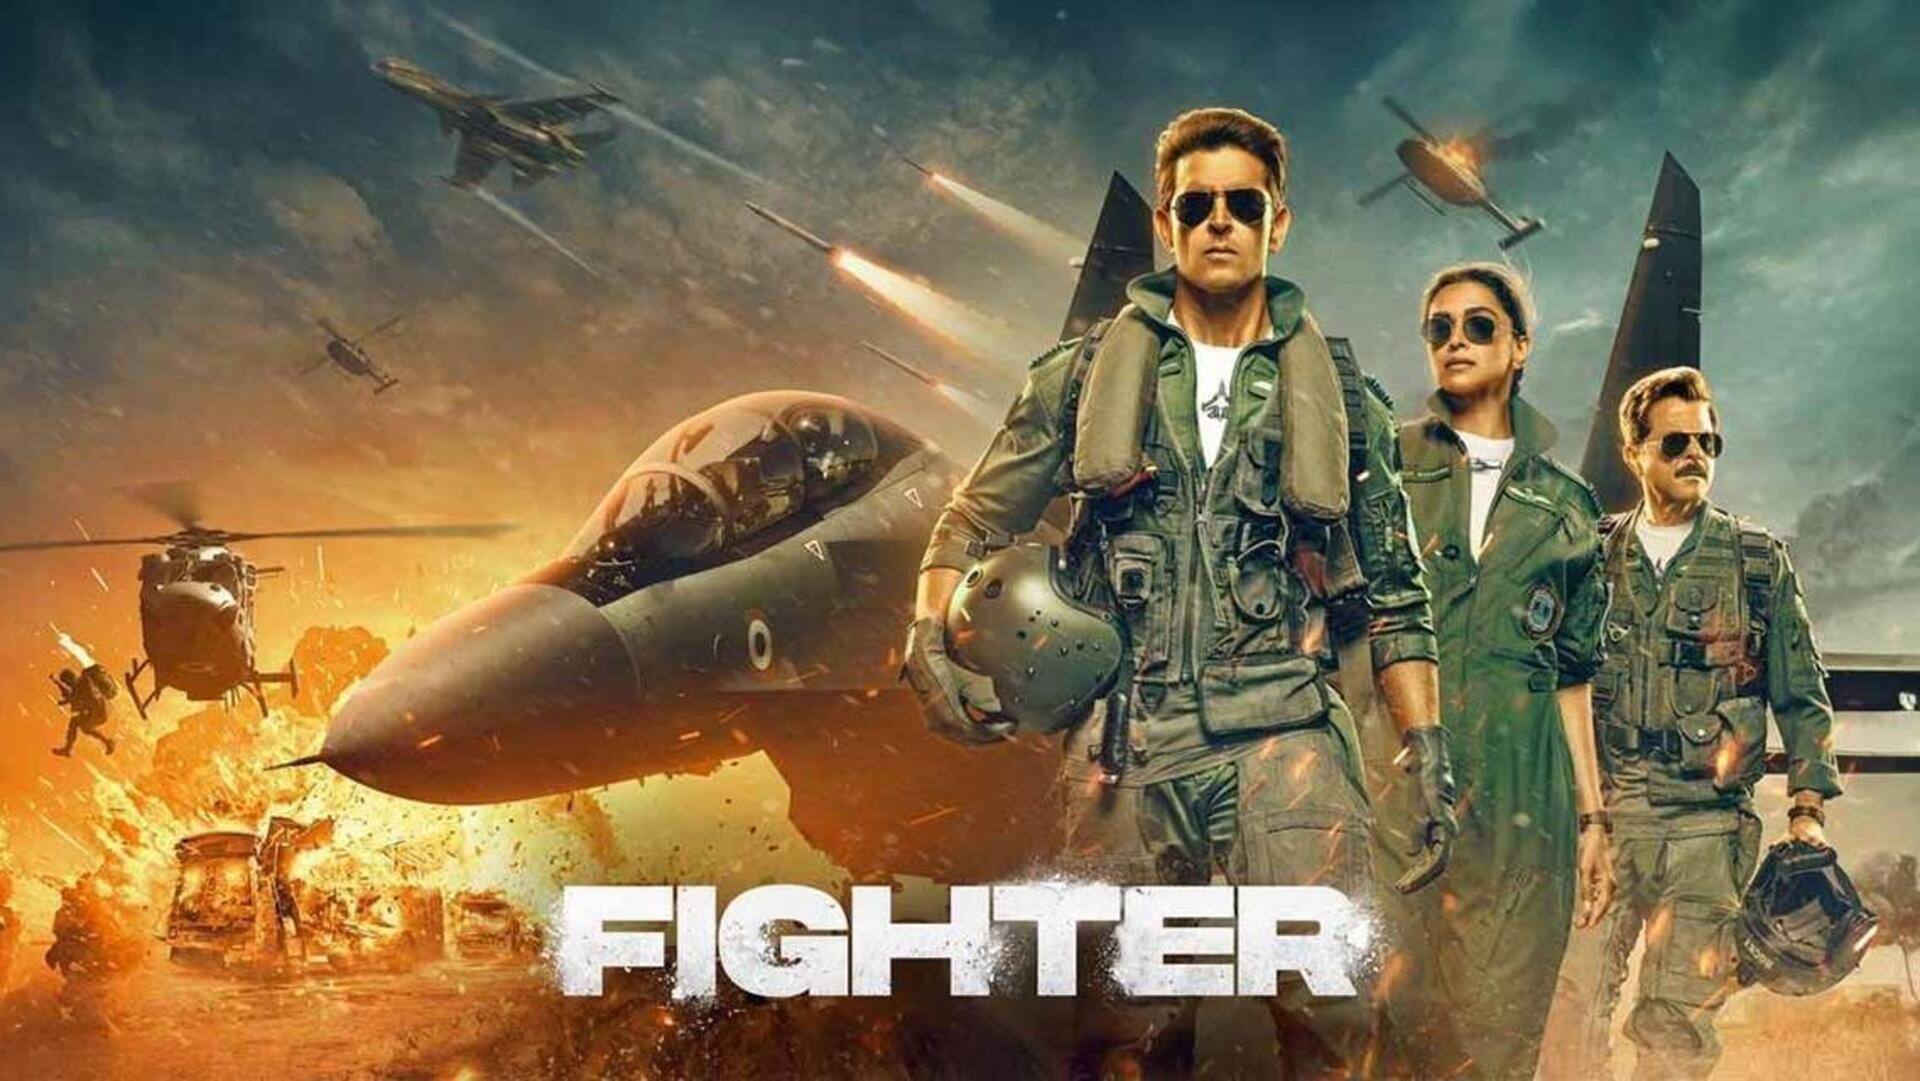 Box office collection: 'Fighter' grows by folds on second weekend